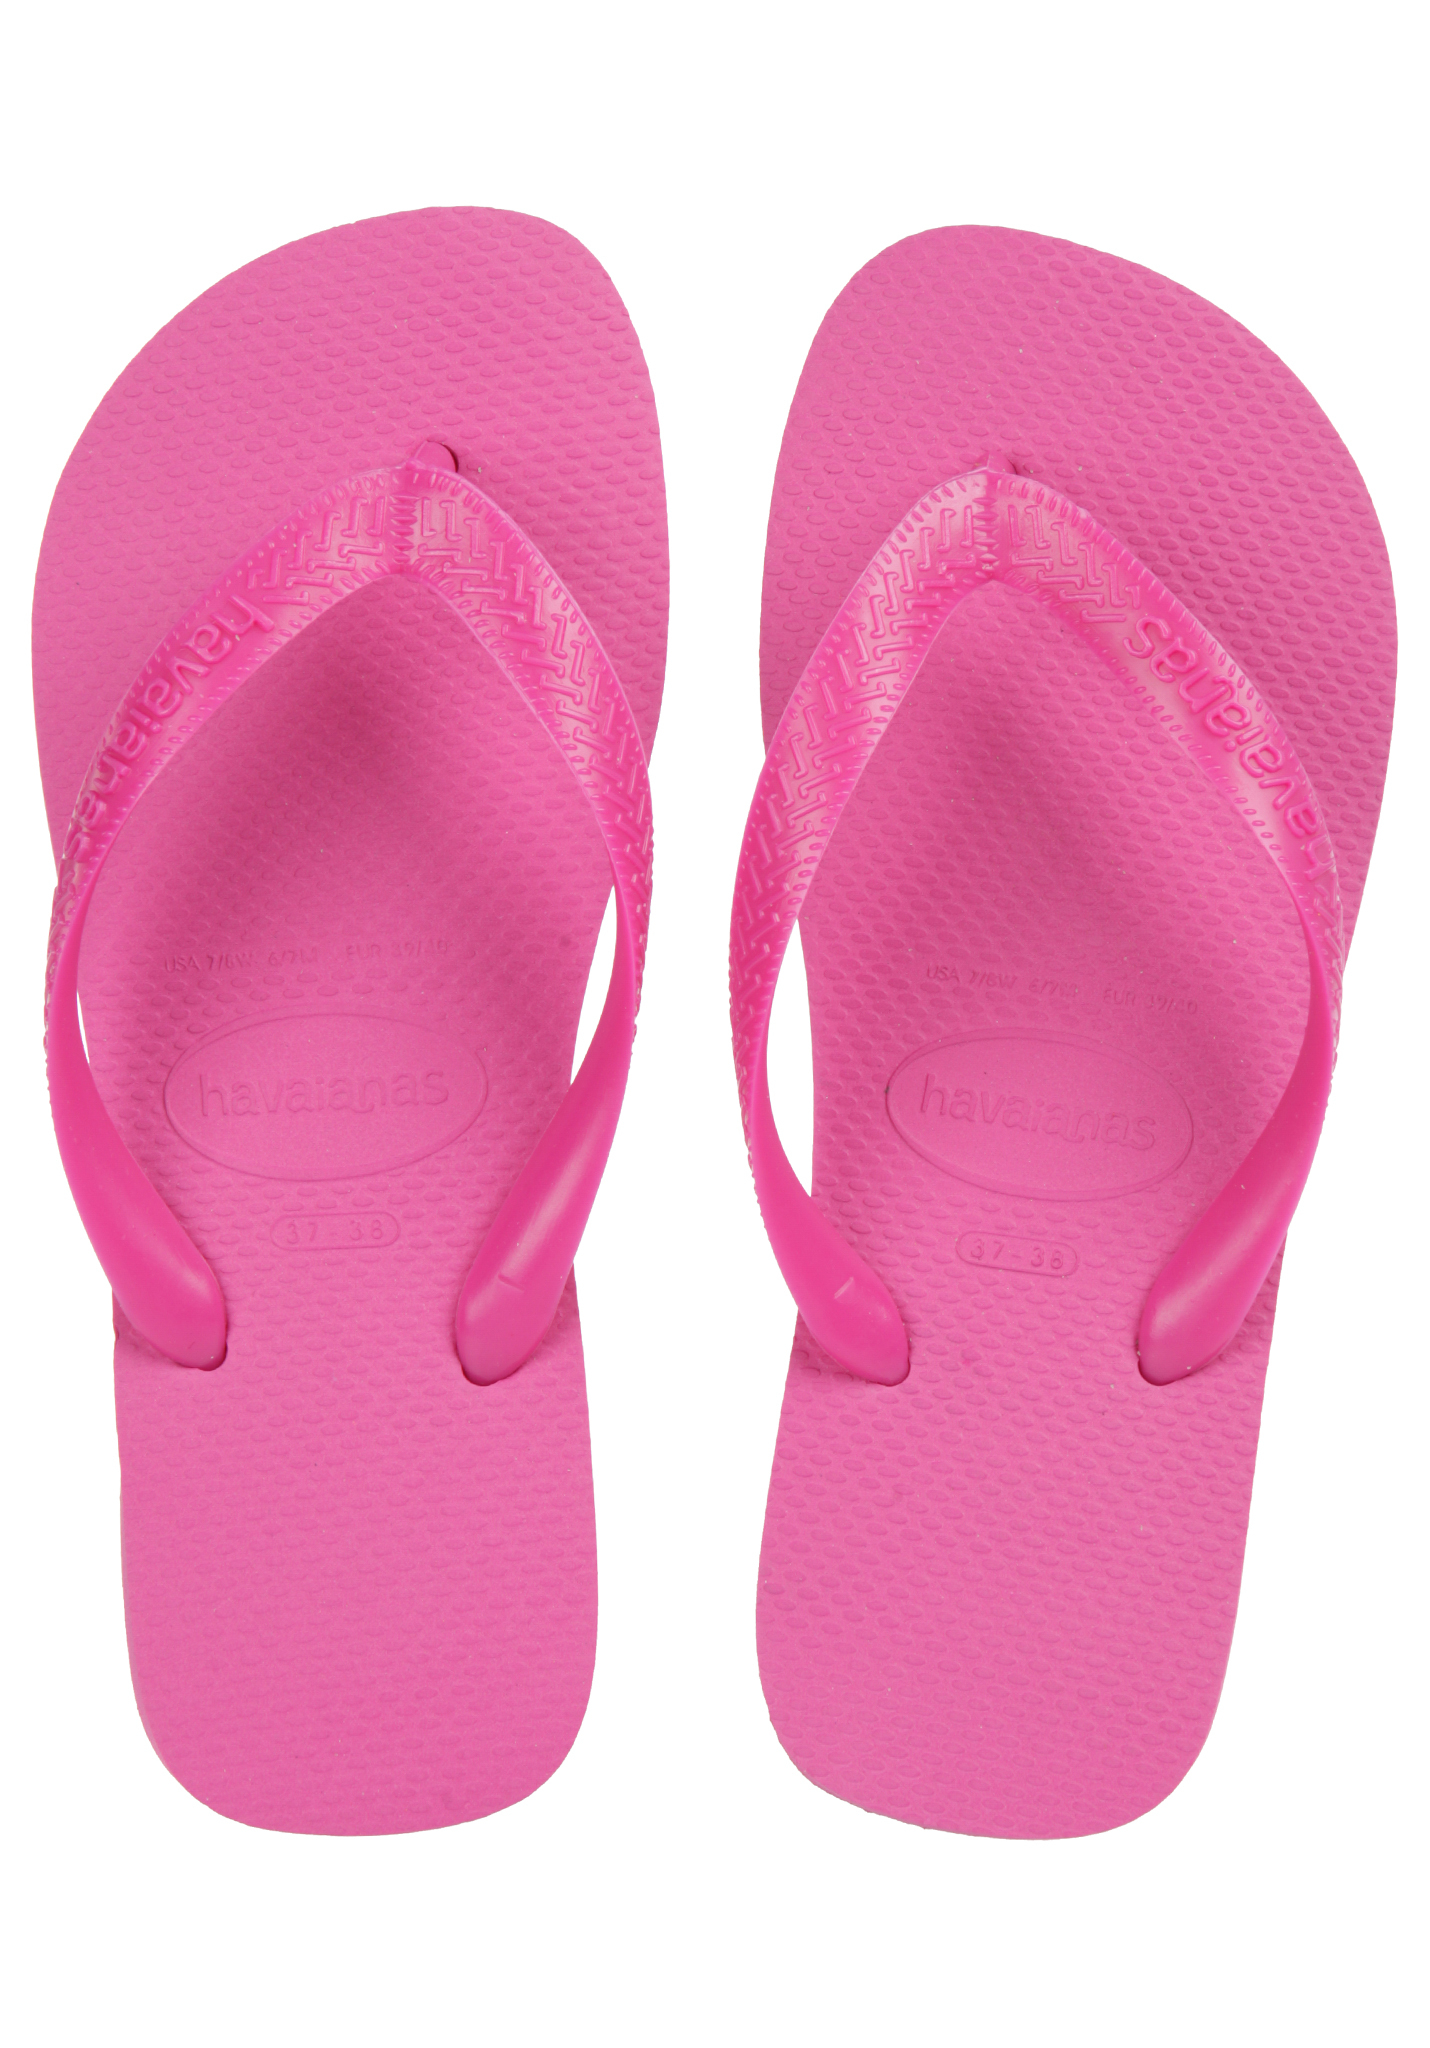 Havaianas Top Zehentrenner hollywood rose 43/44